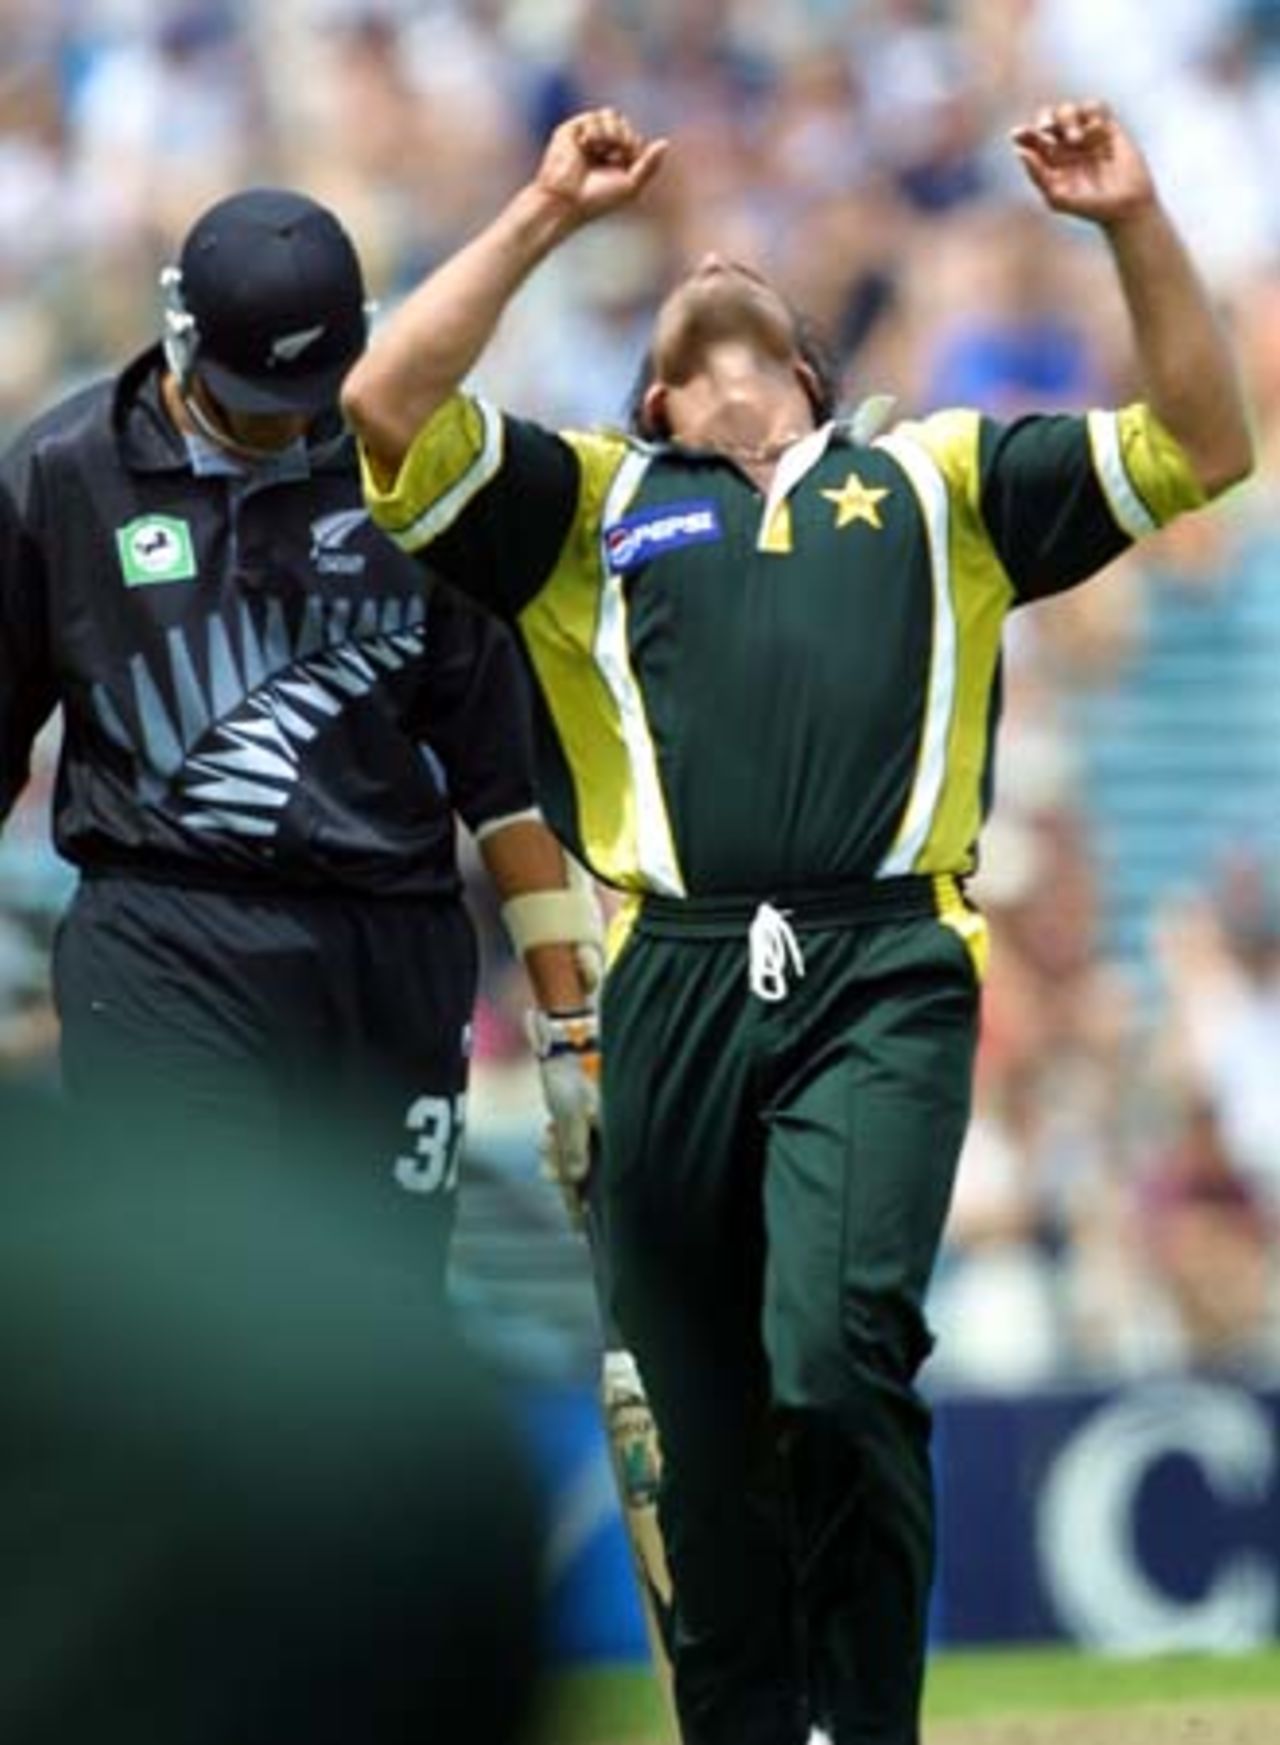 Pakistan fast bowler Shoaib Akhtar looks skyward in celebration of bowling New Zealand batsman Jacob Oram for 16. Oram was Shoaib's first victim in a burst of five wickets for two runs in the space of 11 balls. Shoaib finished with figures of 5-19 from 6.3 overs, his first five-wicket bag in One-Day Internationals. 1st One-Day International: New Zealand v Pakistan at Eden Park, Auckland, 18 February 2001.